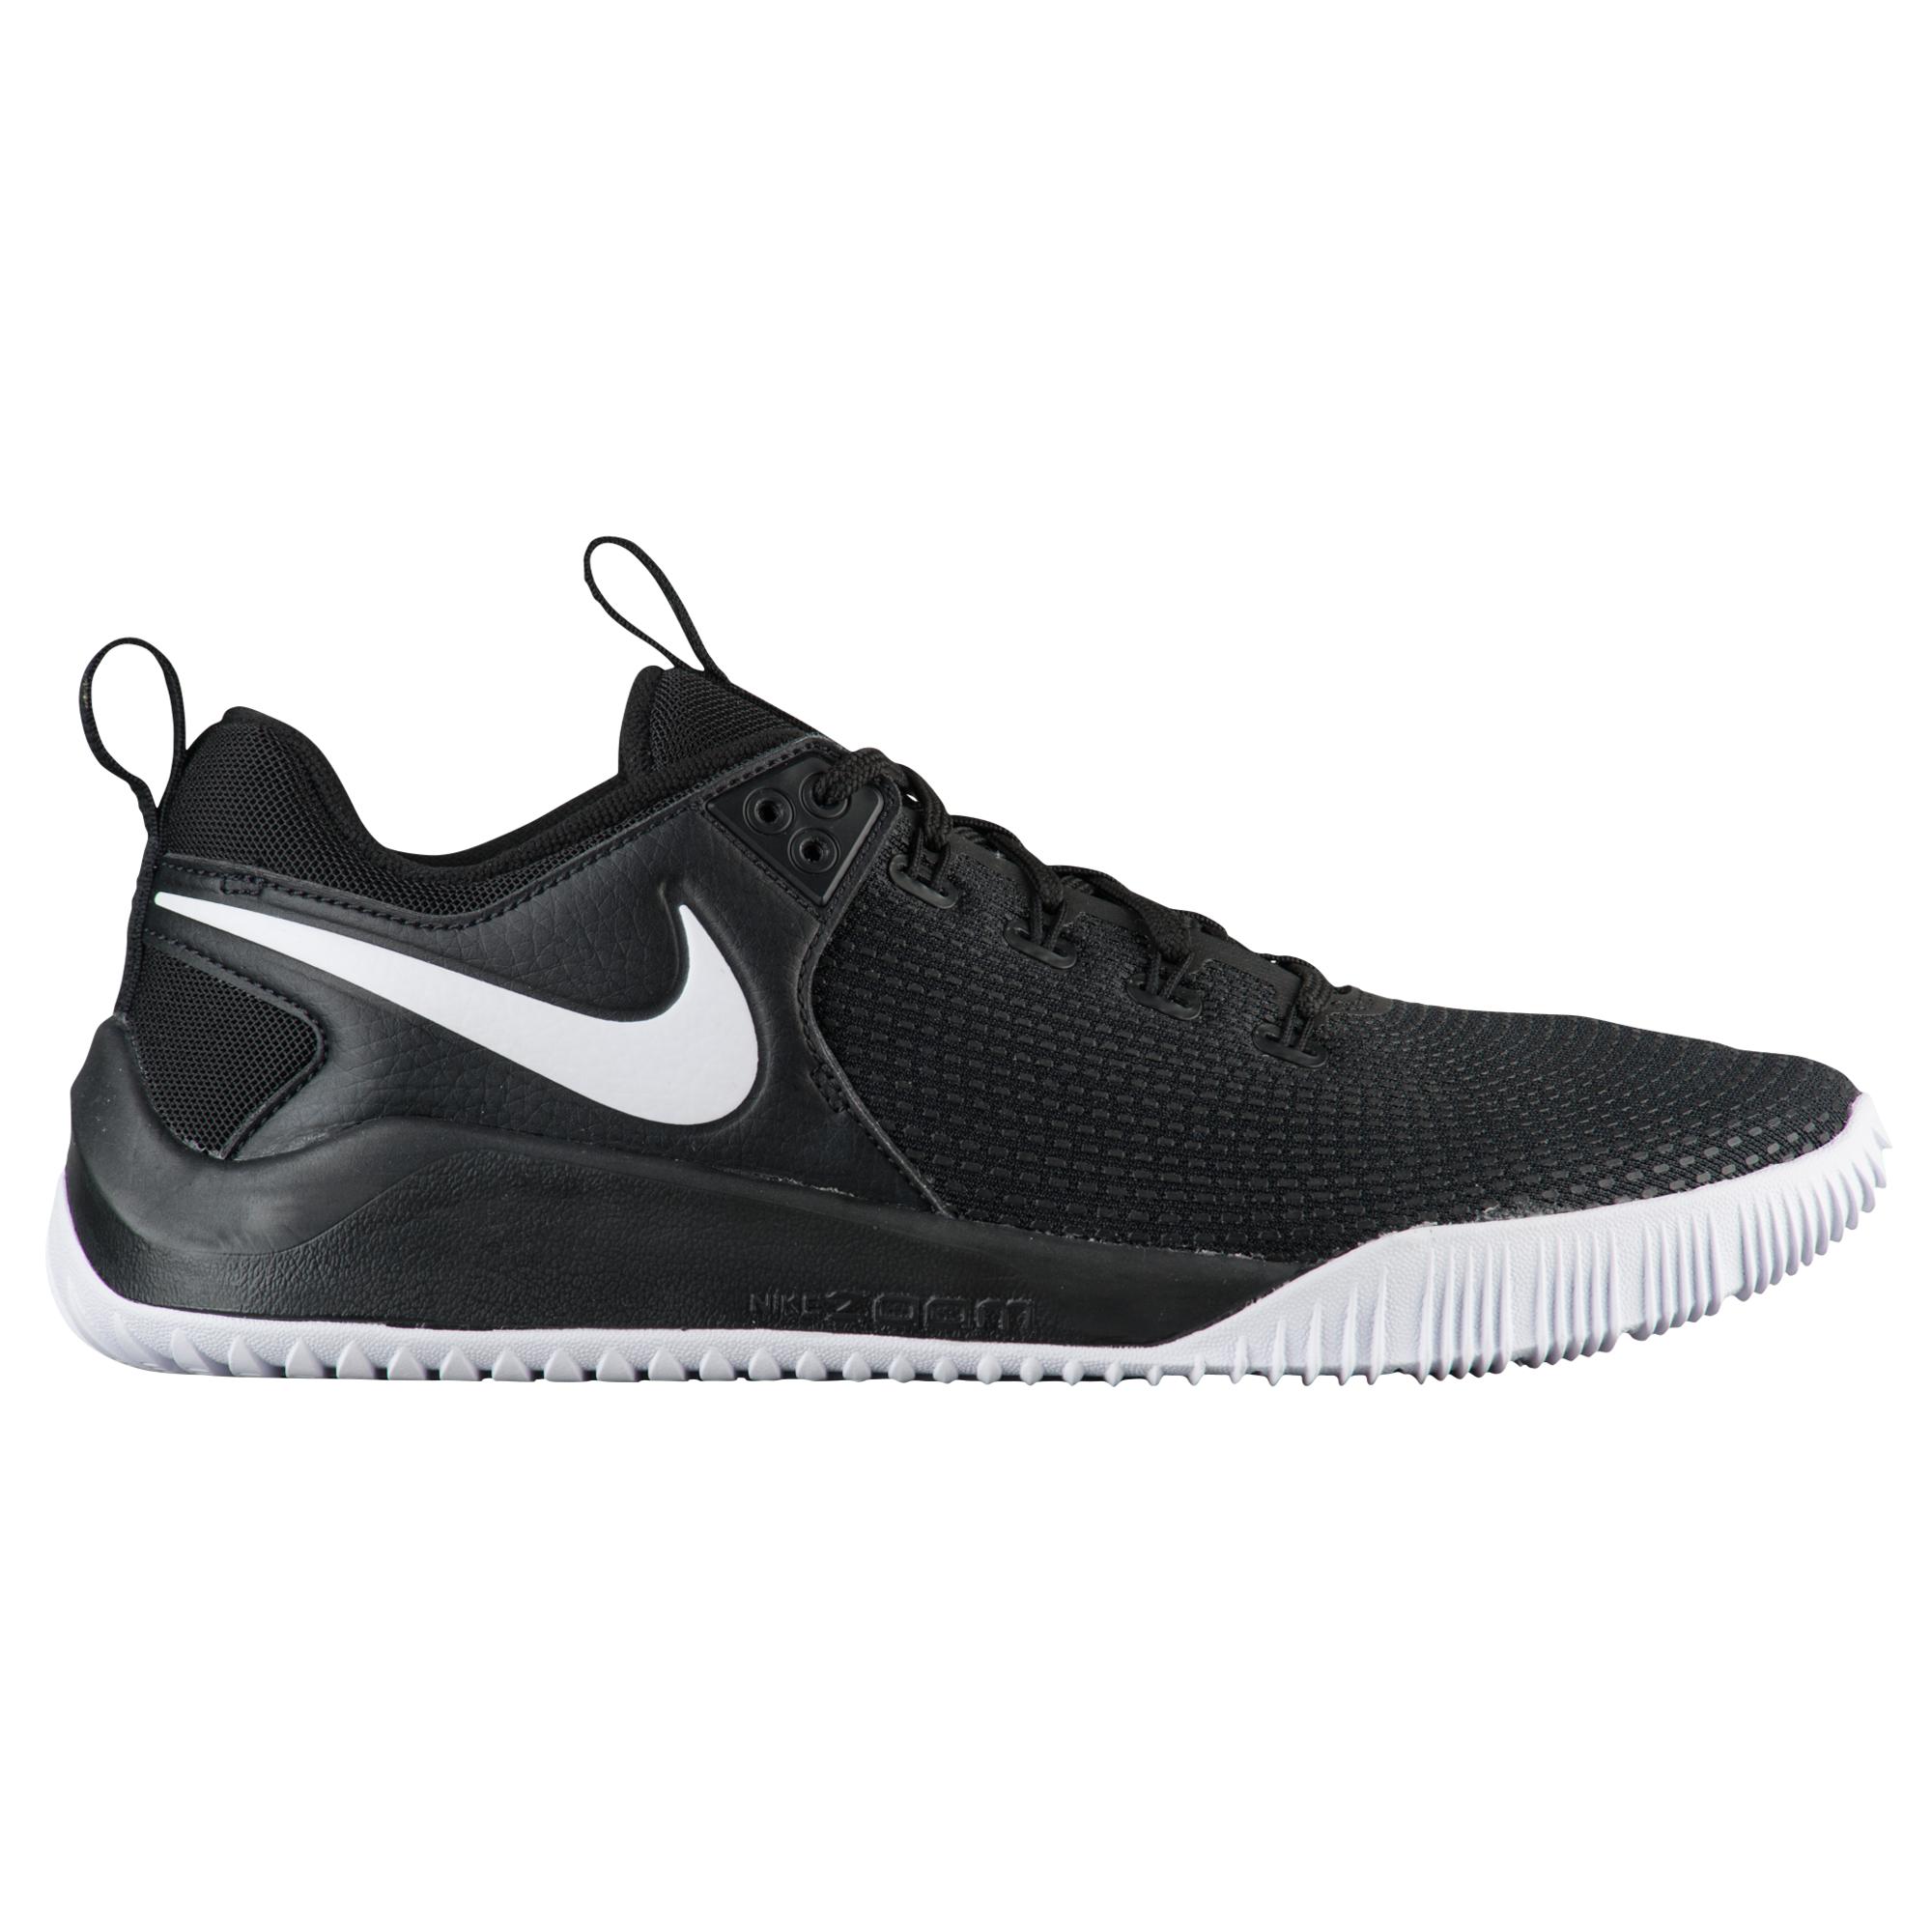 Nike Rubber Zoom Hyperace 2 Volleyball Shoes in Black/White (Black) - Lyst